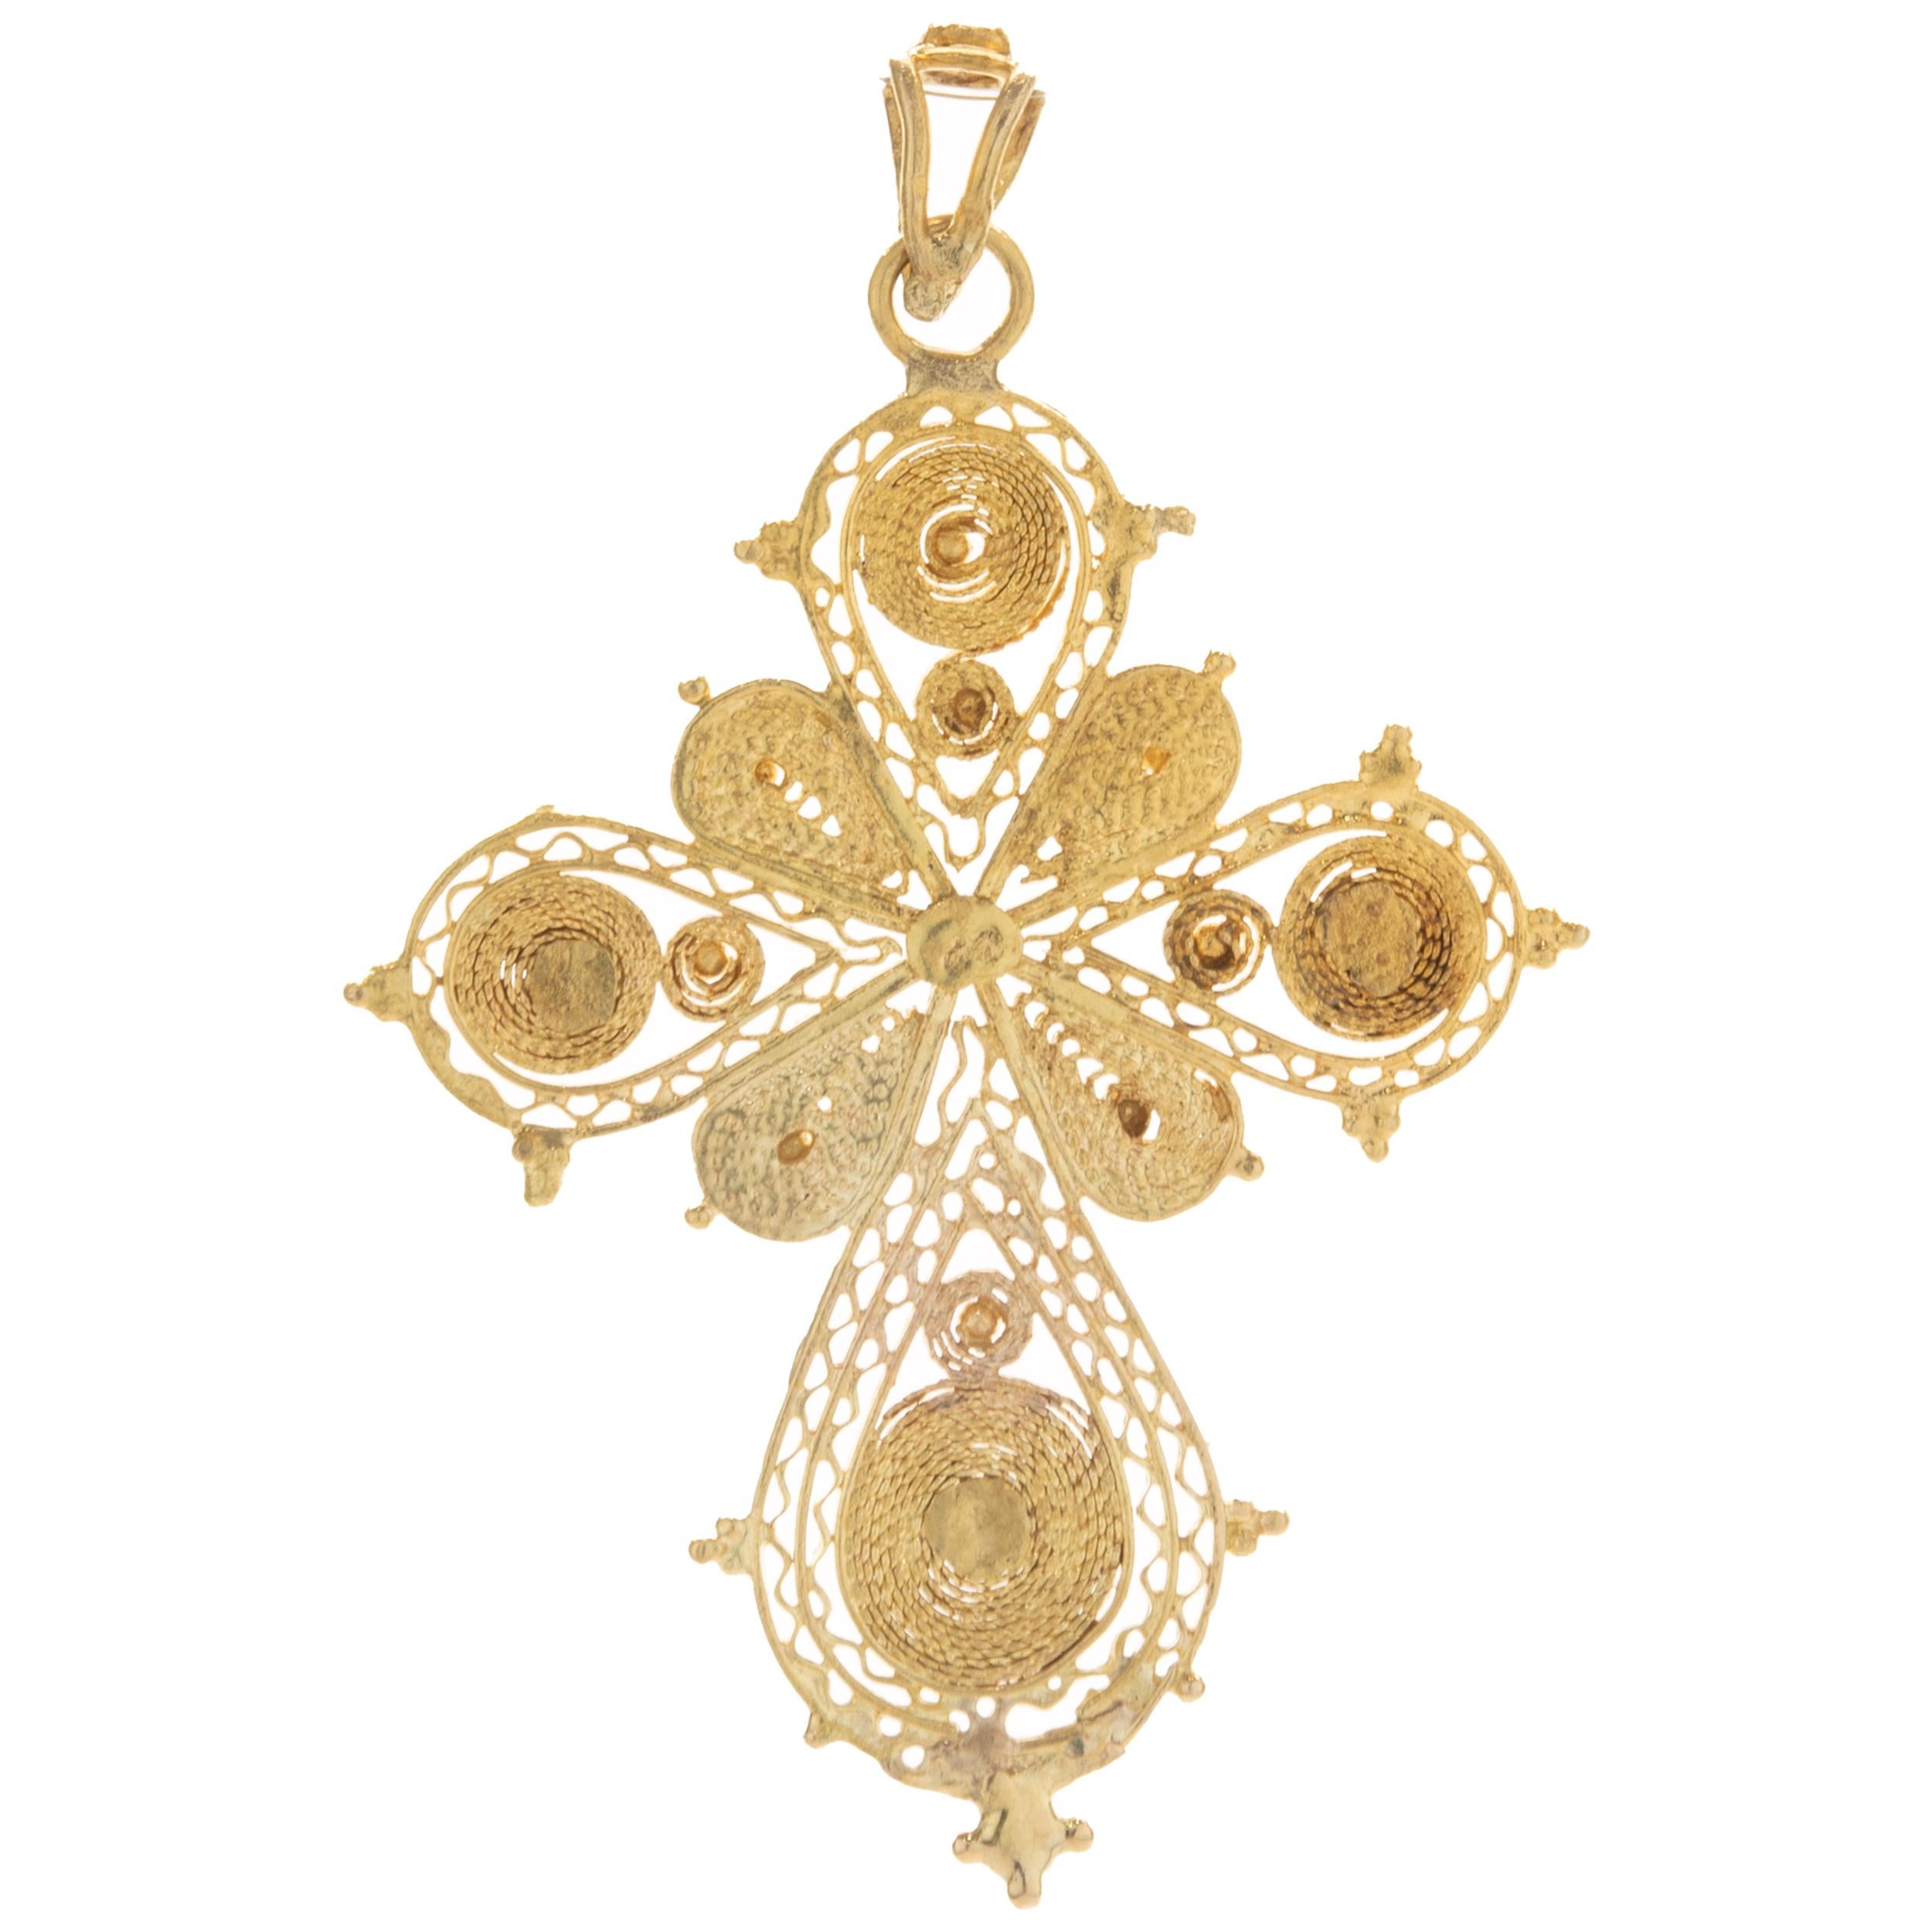 Material: 18K yellow gold
Dimensions: pendant measures 43.25 x 28.75mm
Weight: 2.95 grams
